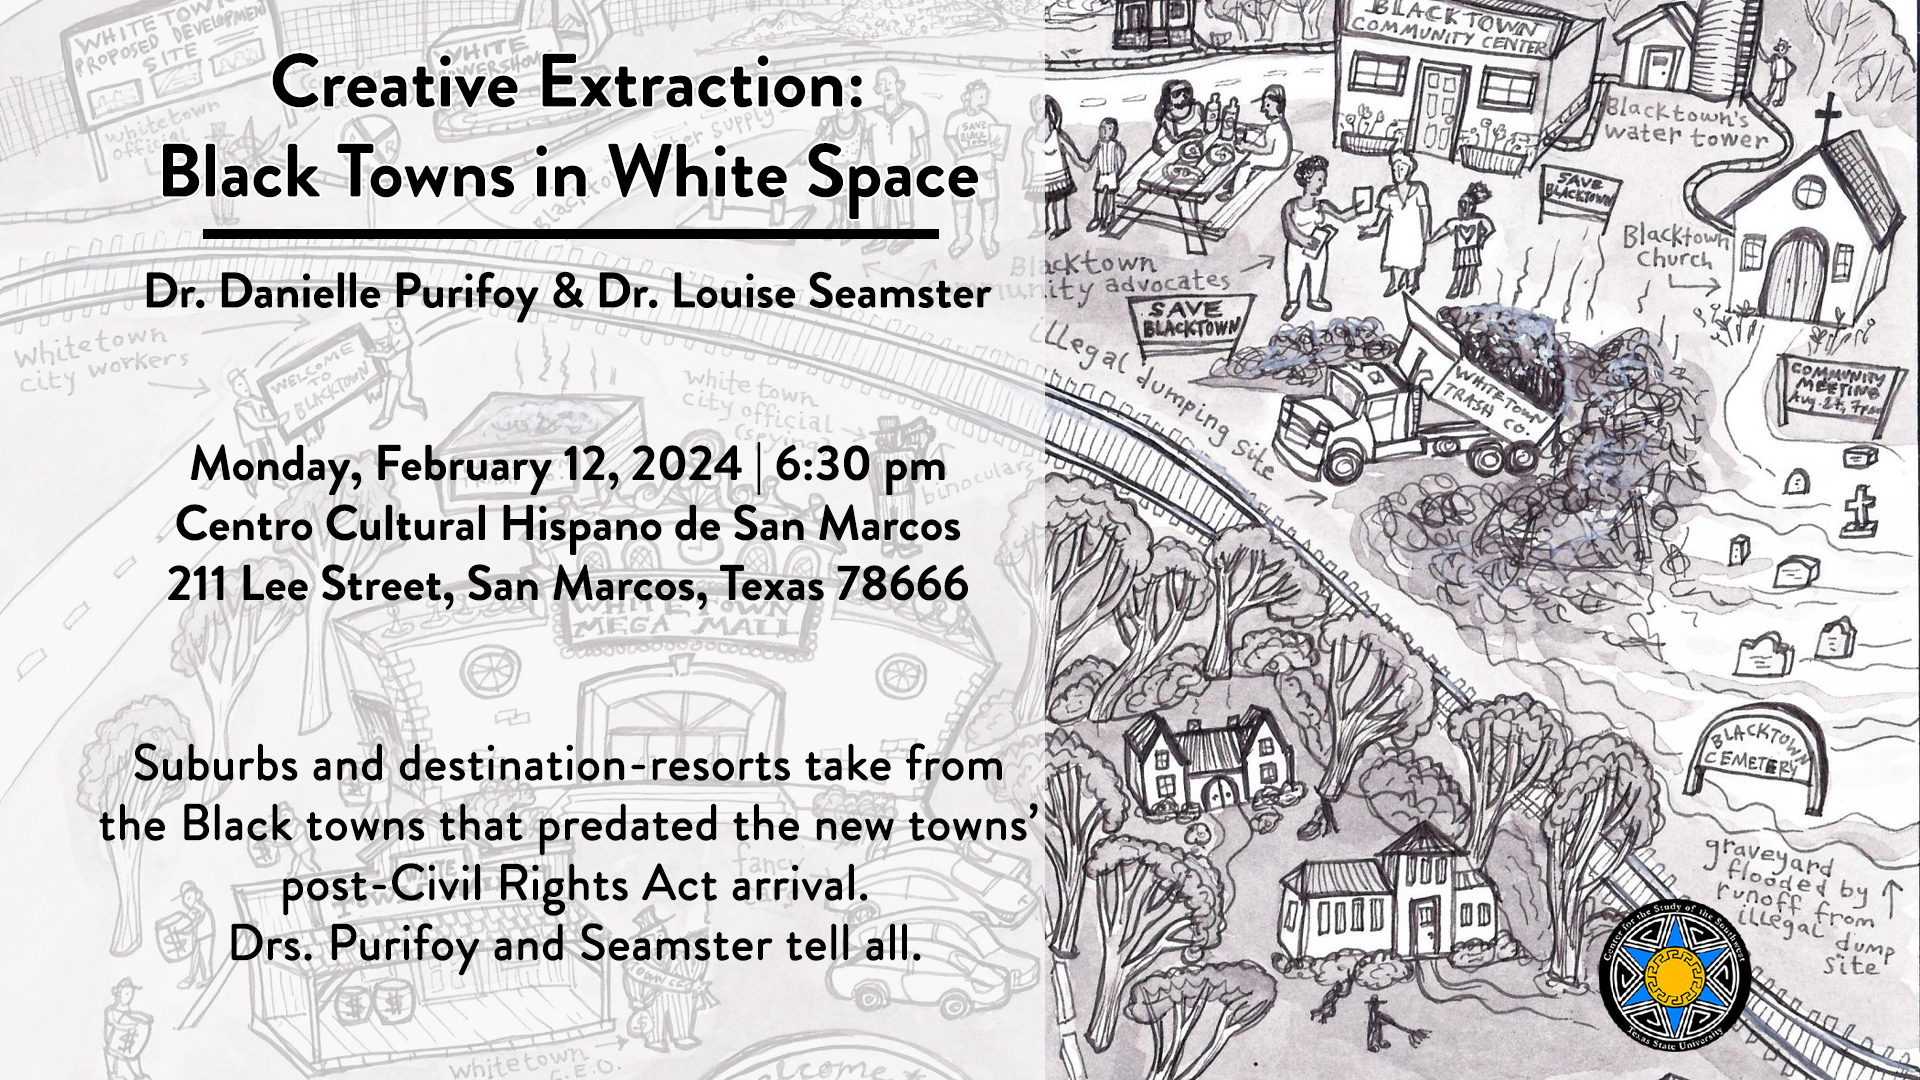 Creative Extraction: Black Towns in White Space